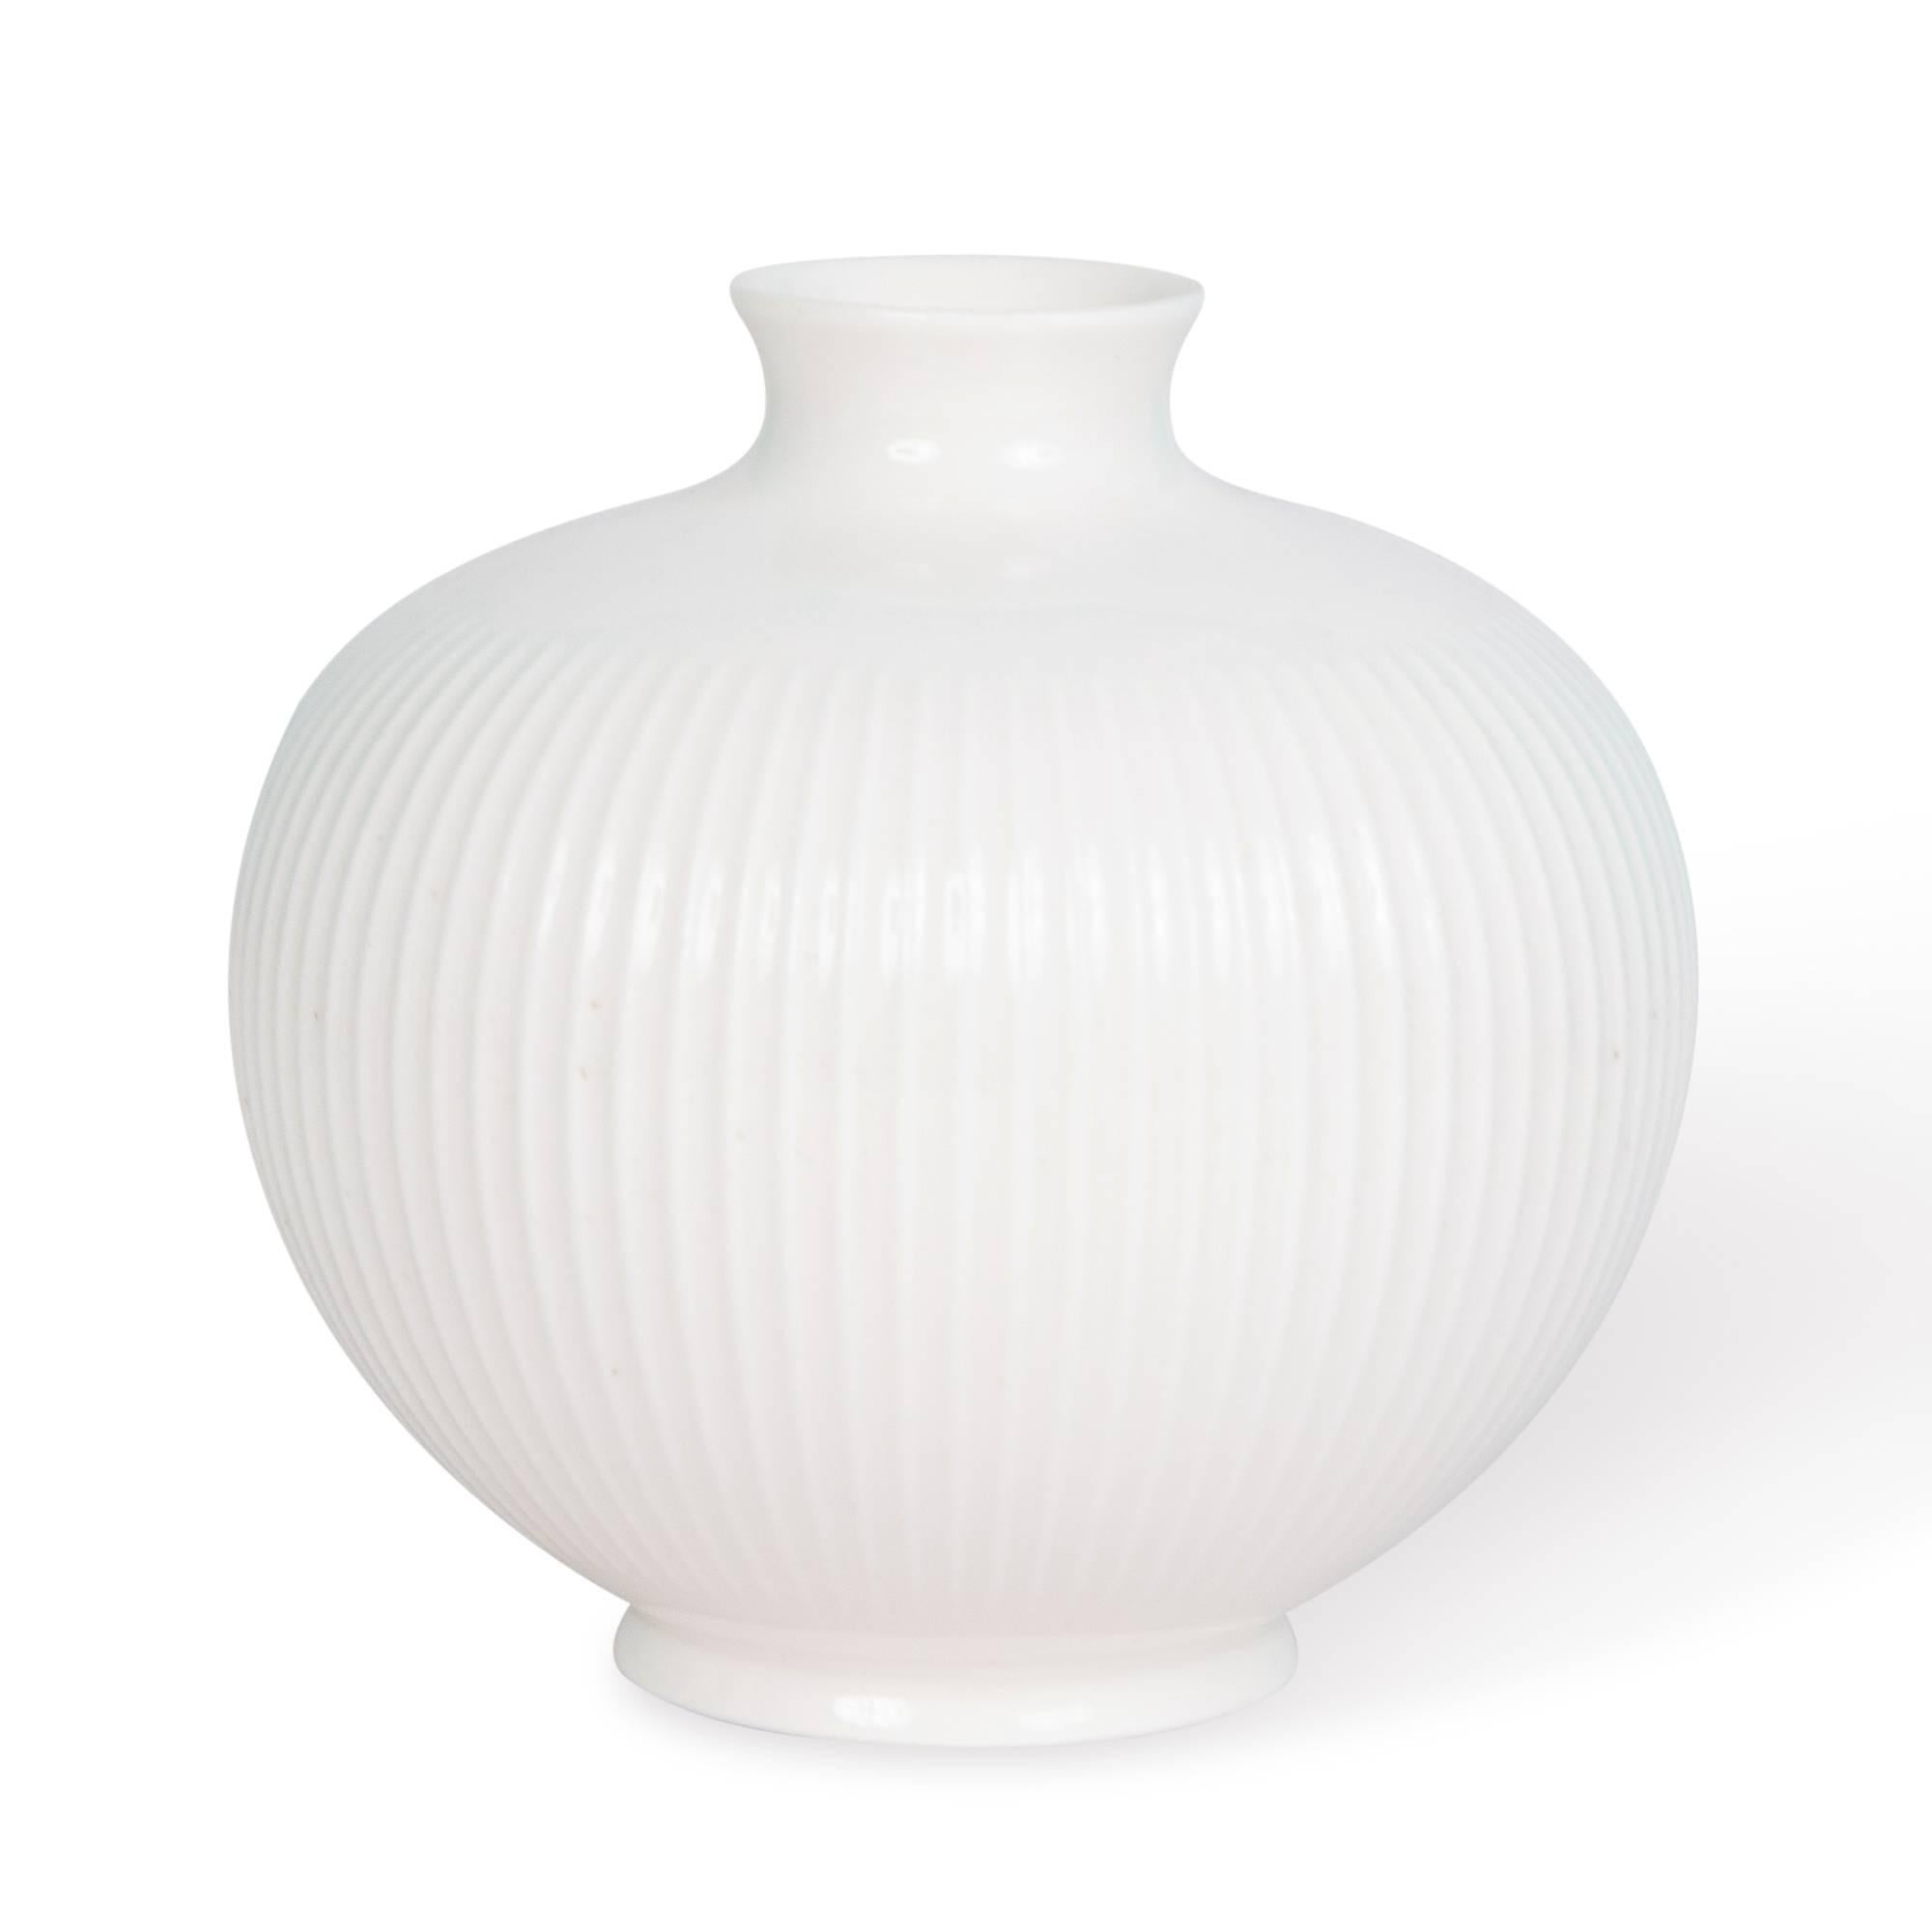 Porcelain bulbous form vase, with grooved sides and flared rim, by Royal Copenhagen, Denmark, 1960s. Measures: Height 4 in, diameter 4 1/2 in.
      